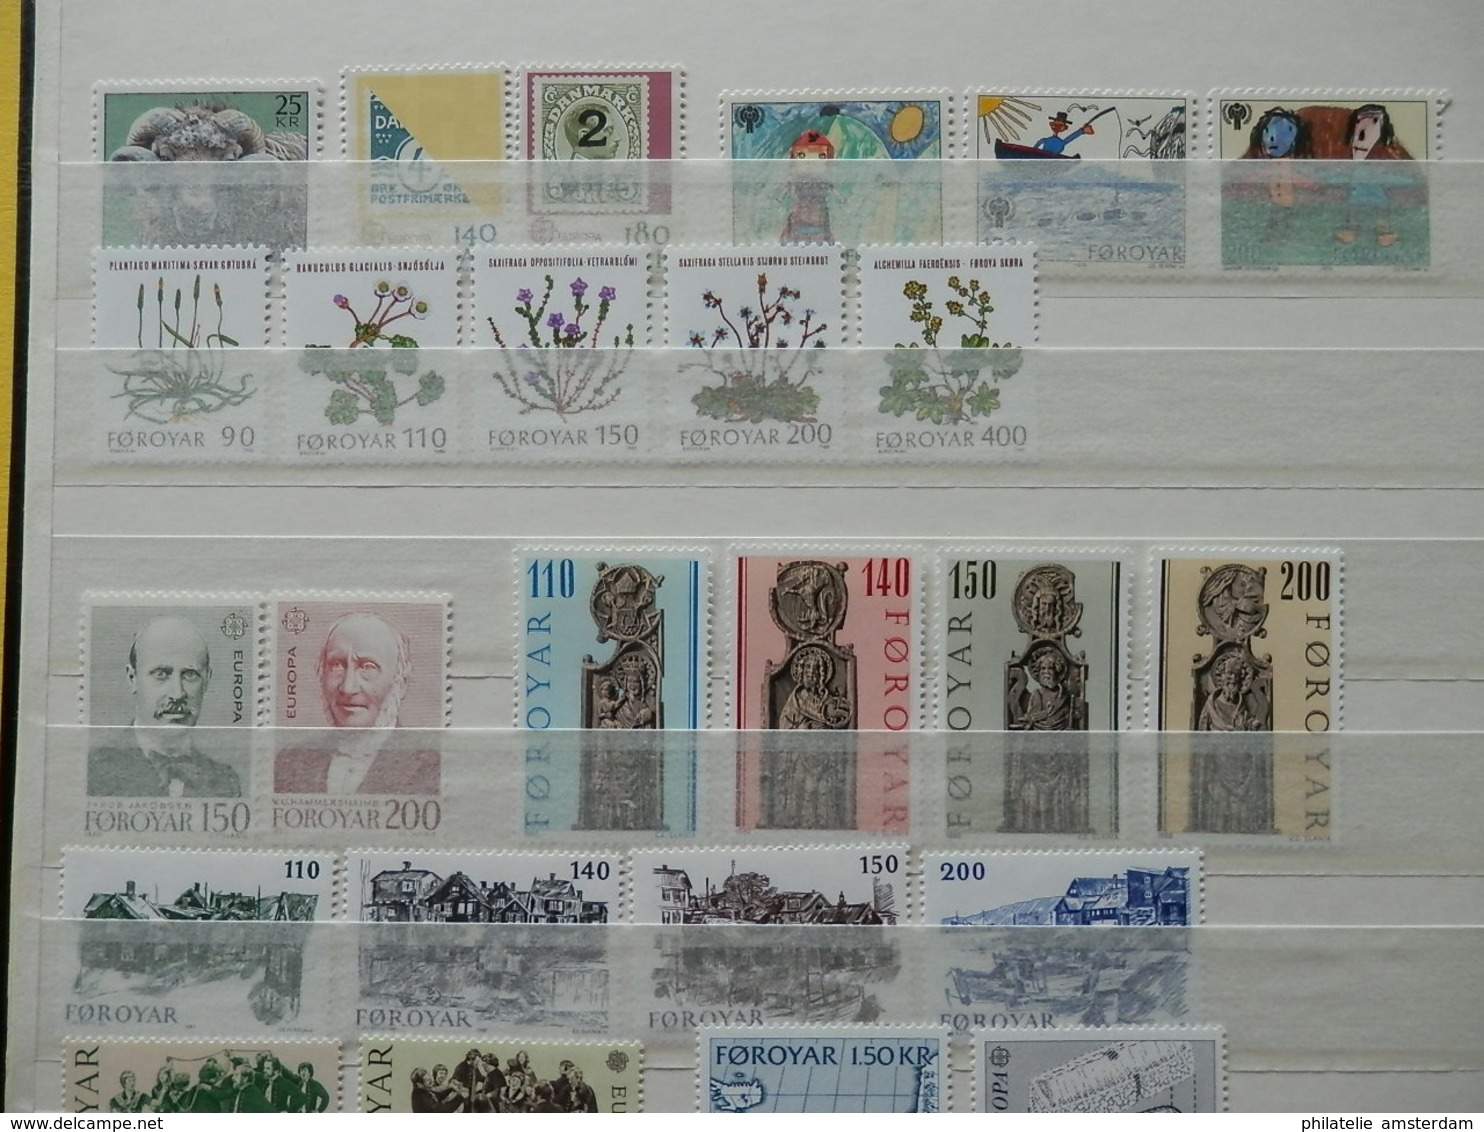 Denmark, Greenland & Faroe Islands: MNH collection in stockbook and year sets